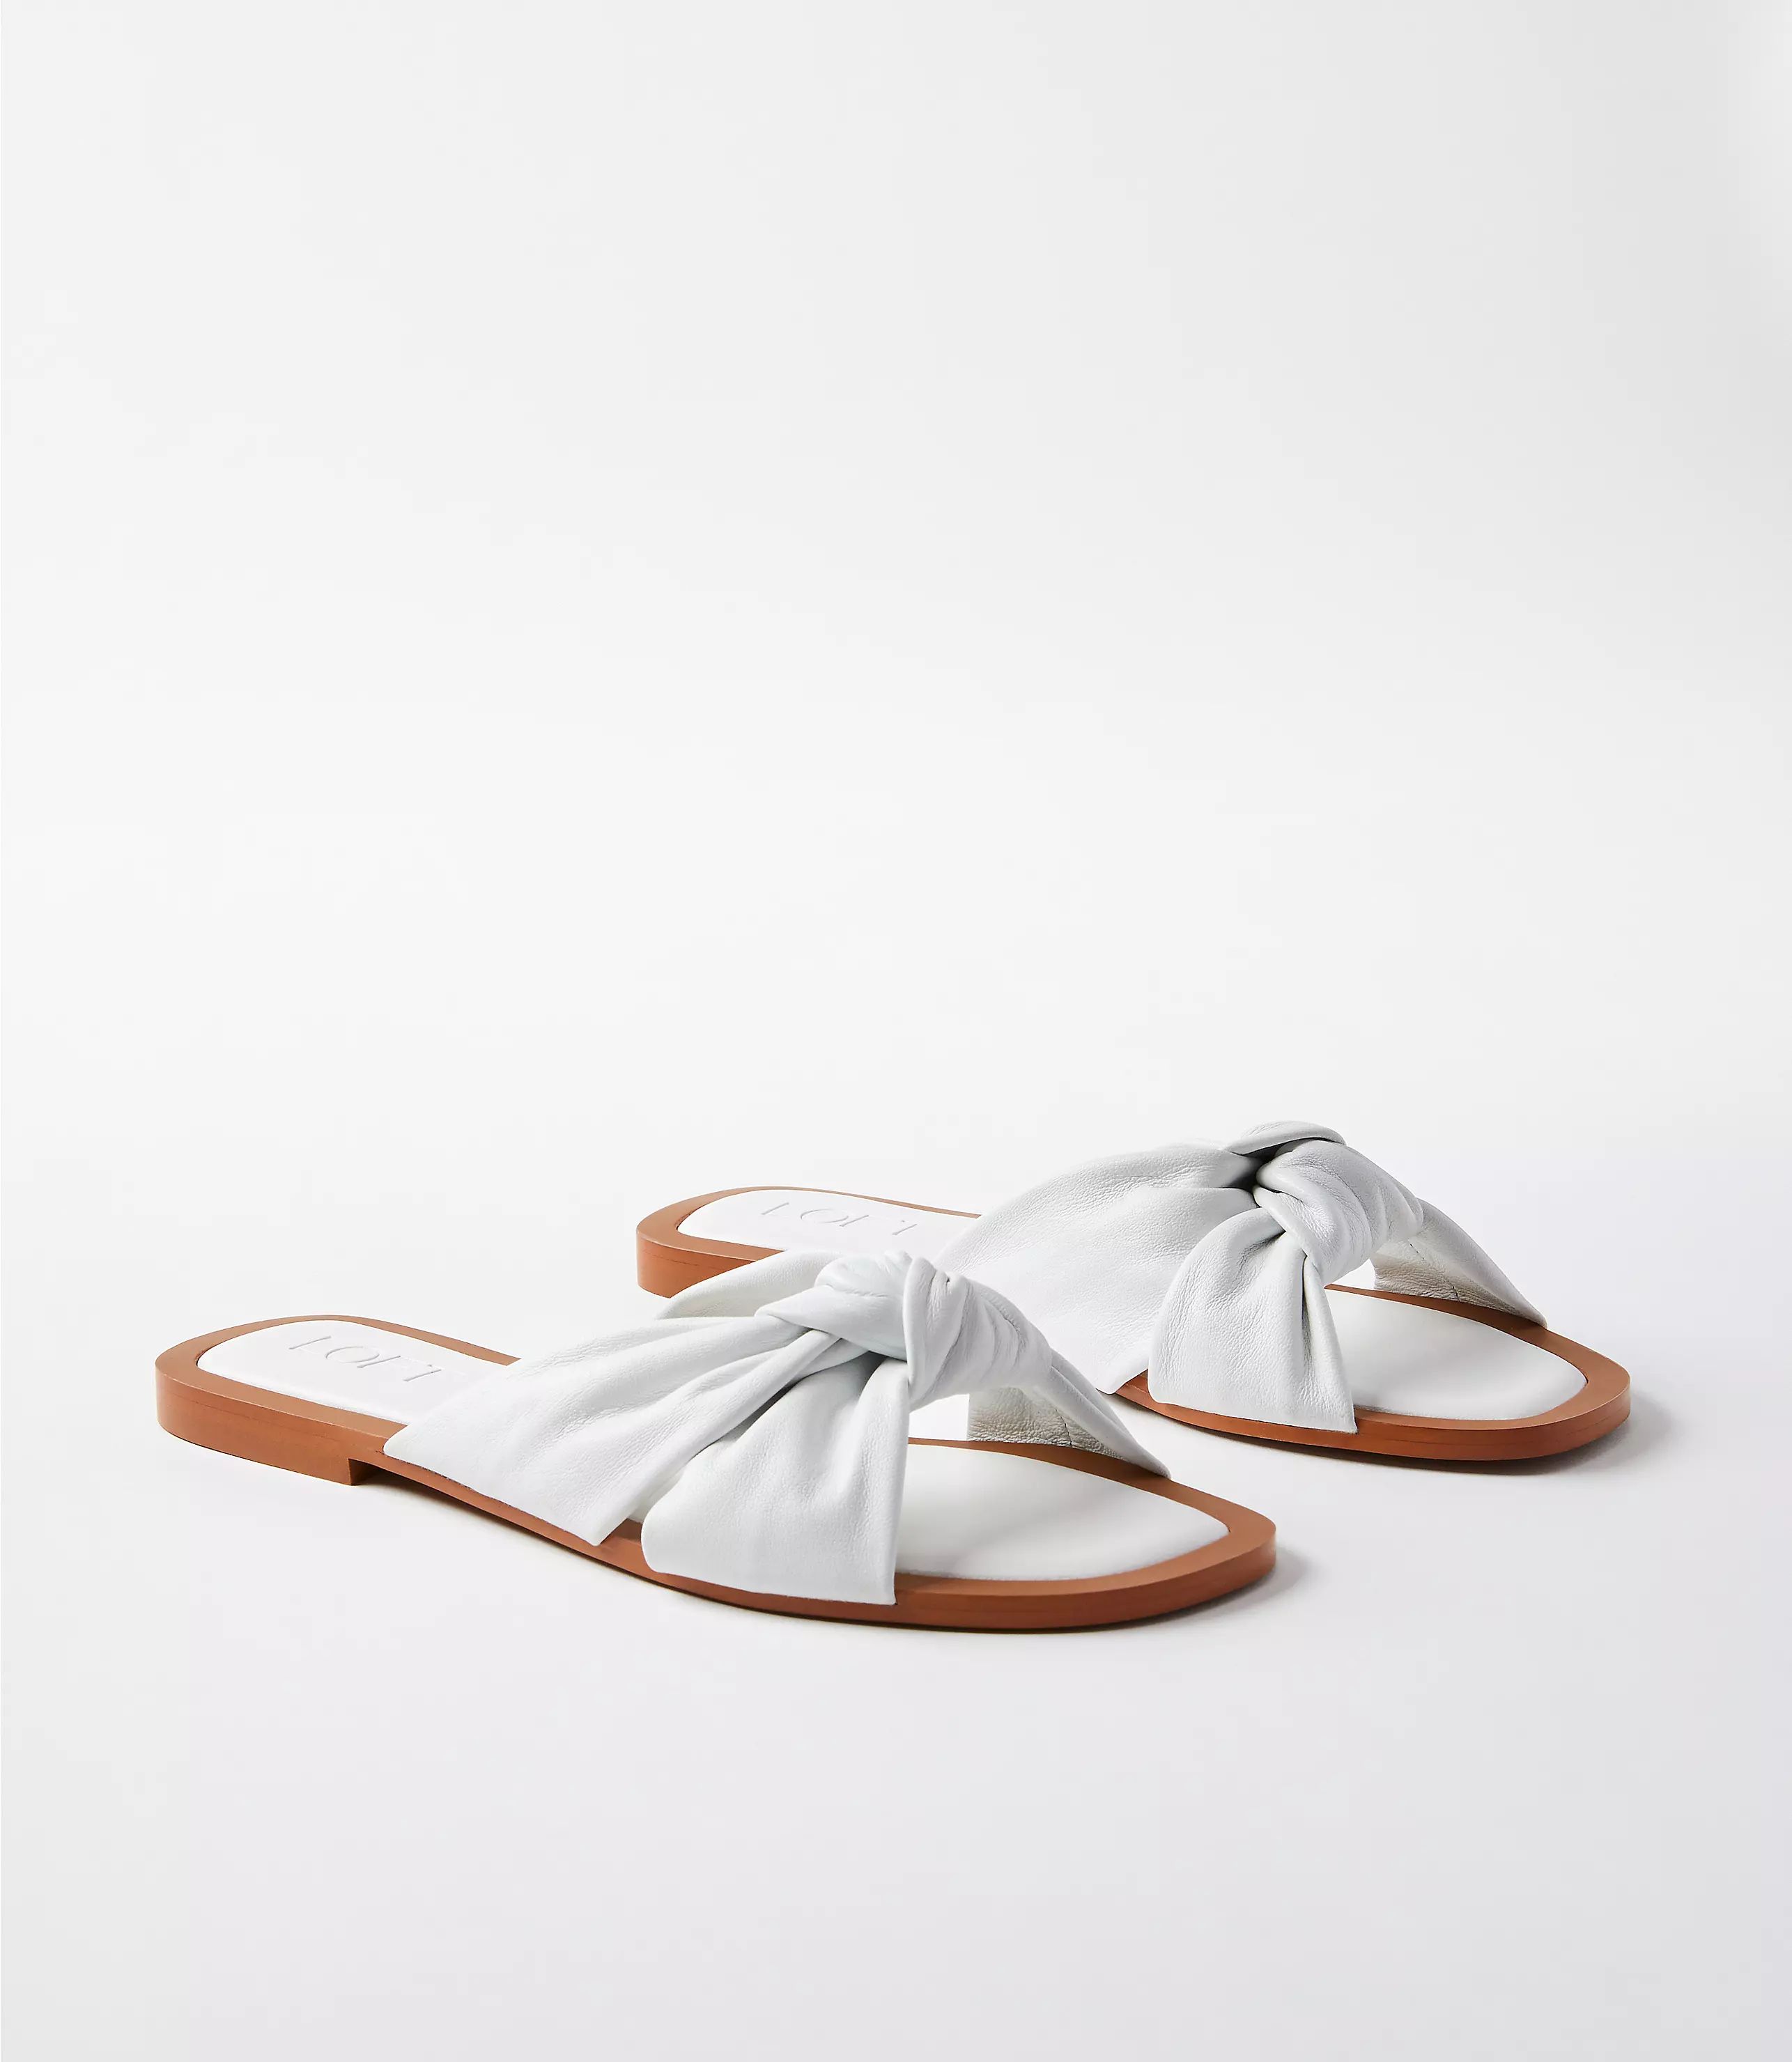 Knotted Leather Sandals | LOFT